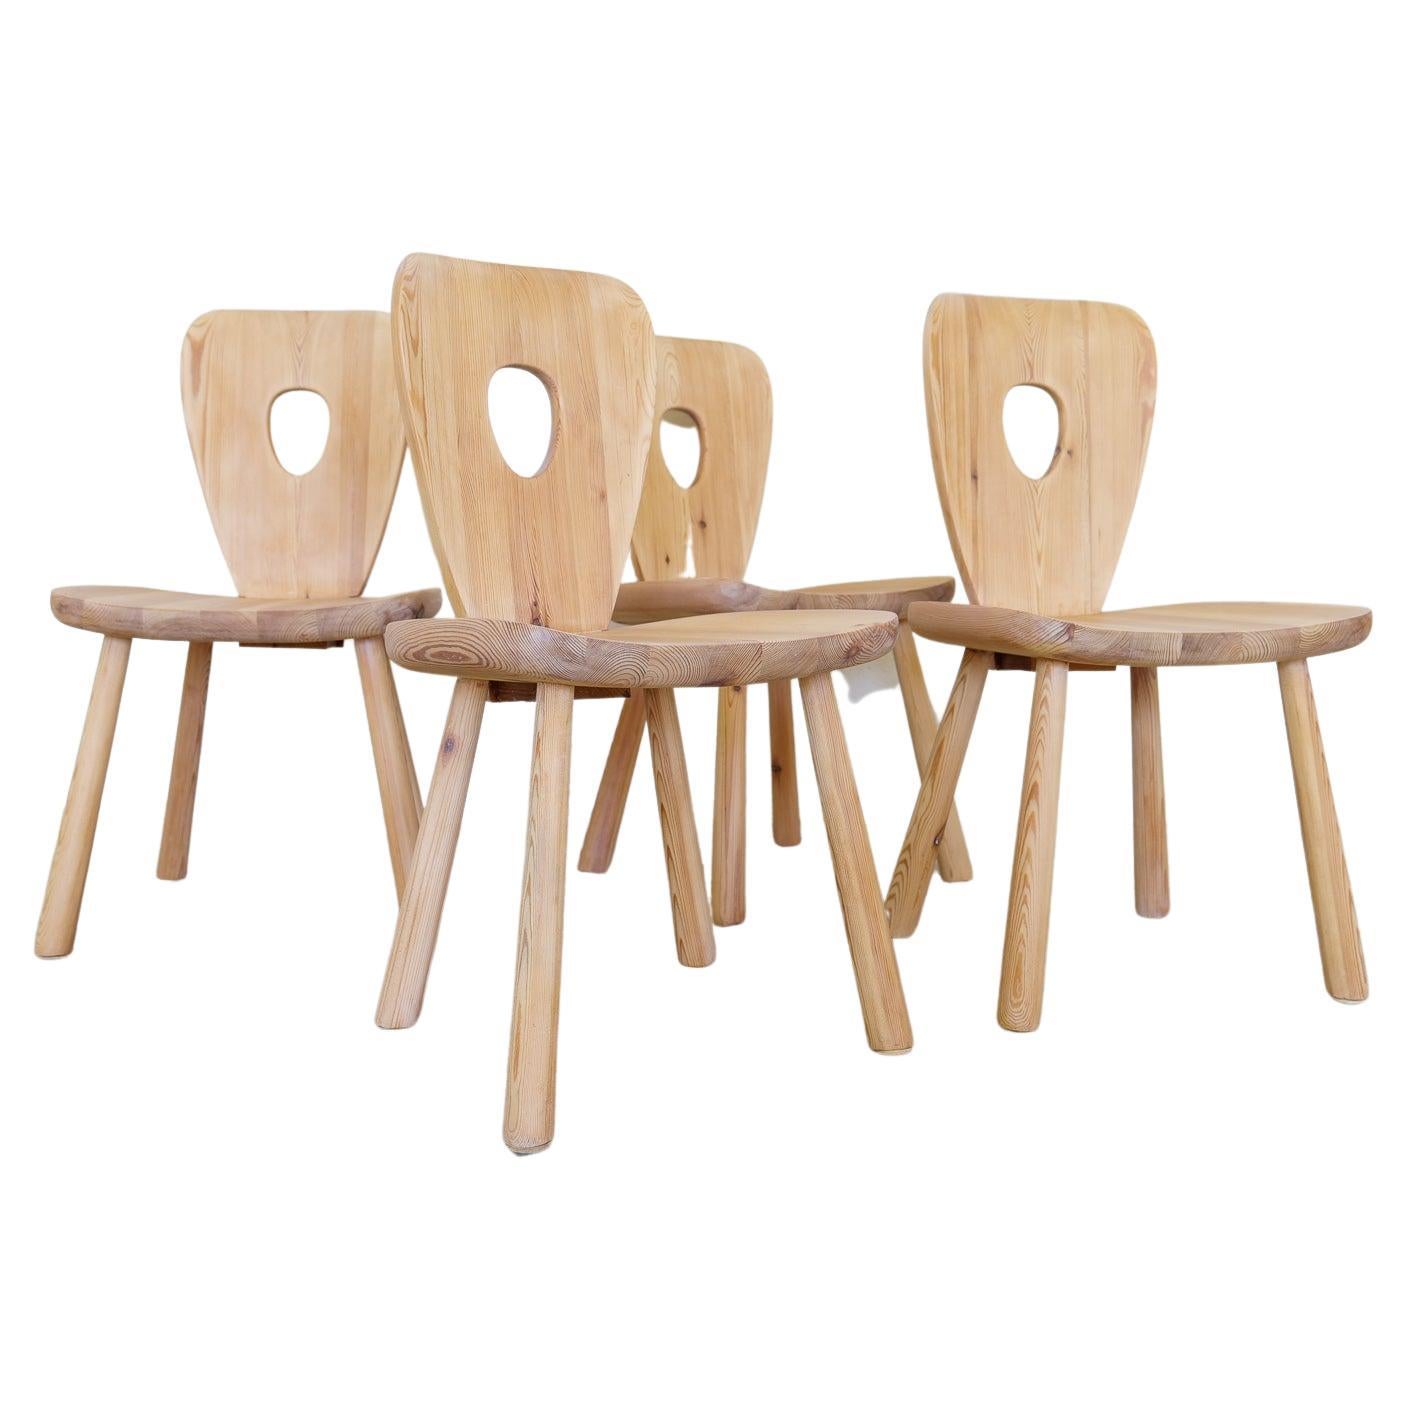 Swedish Sculptural Dining Chairs in Pine Bo Fjaestad, Sweden 1930s For Sale